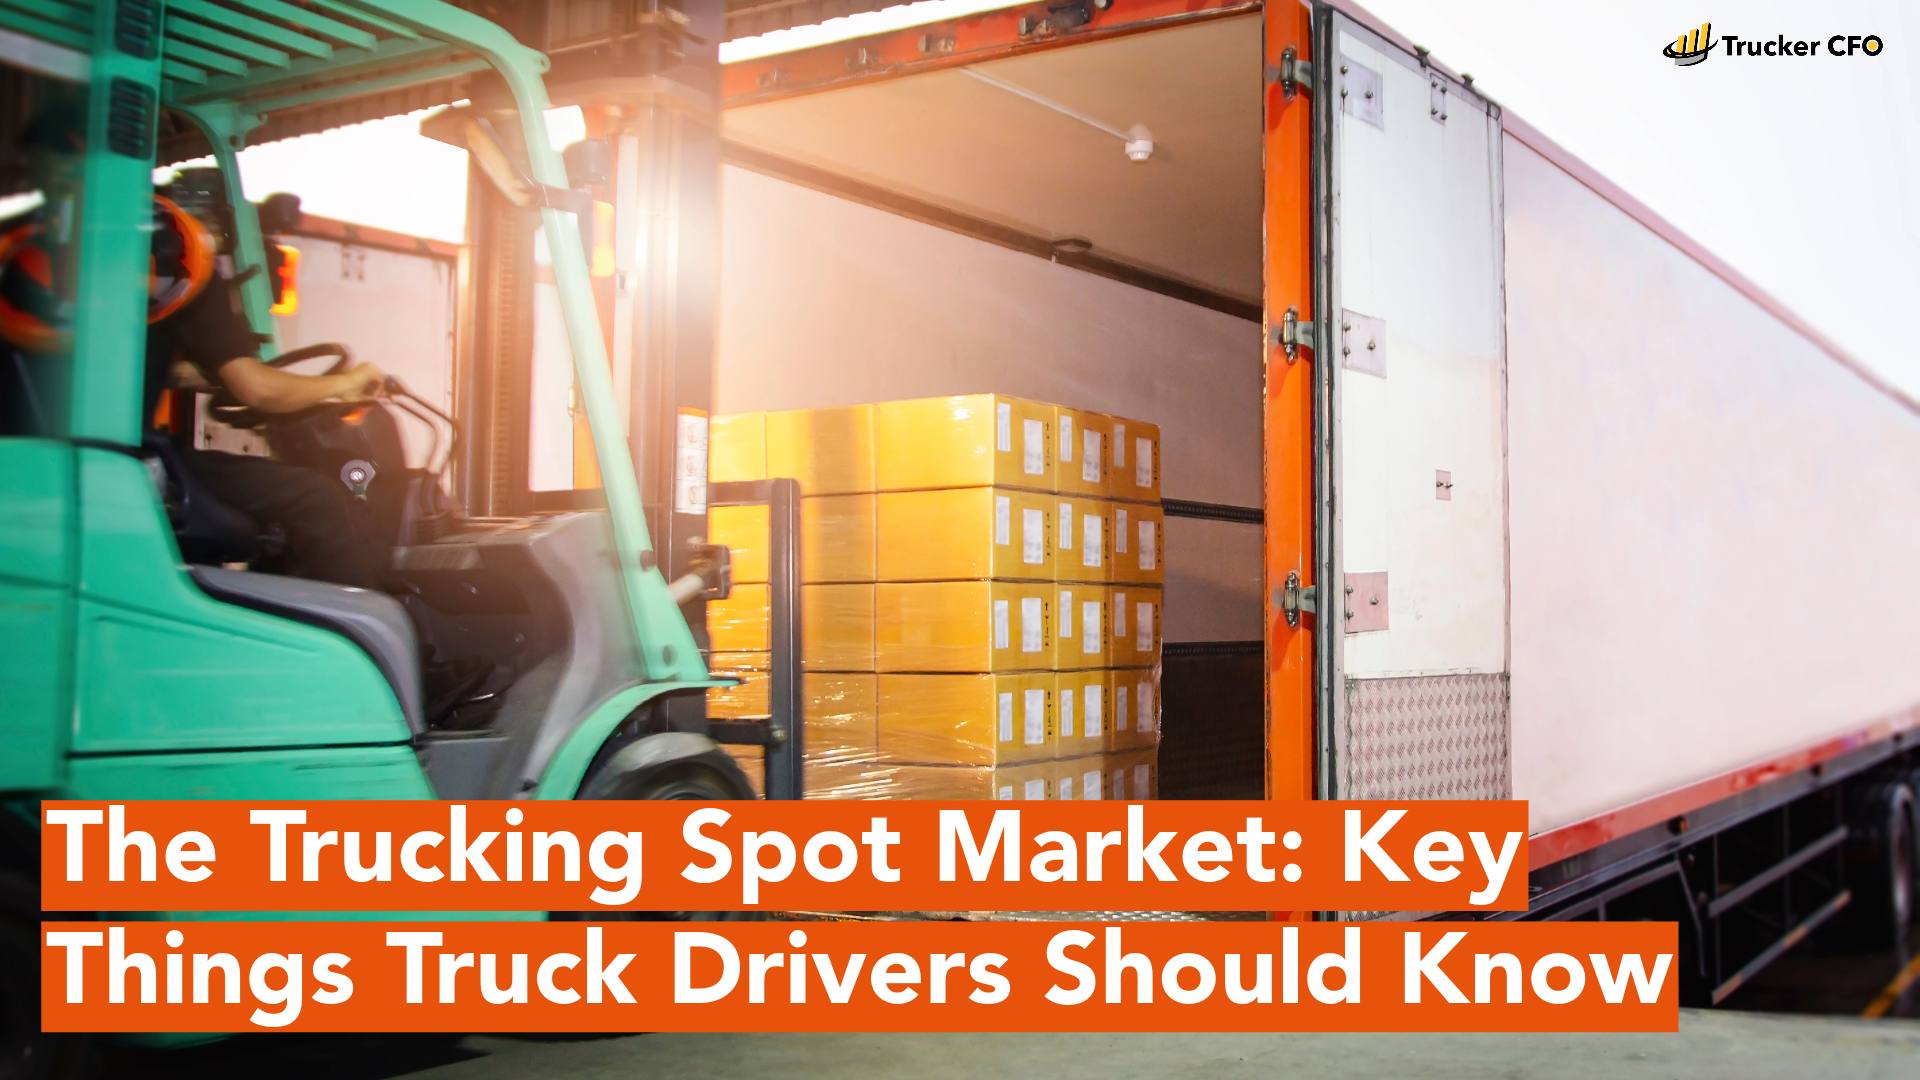 The Trucking Spot Market: Key Things Truck Drivers Should Know